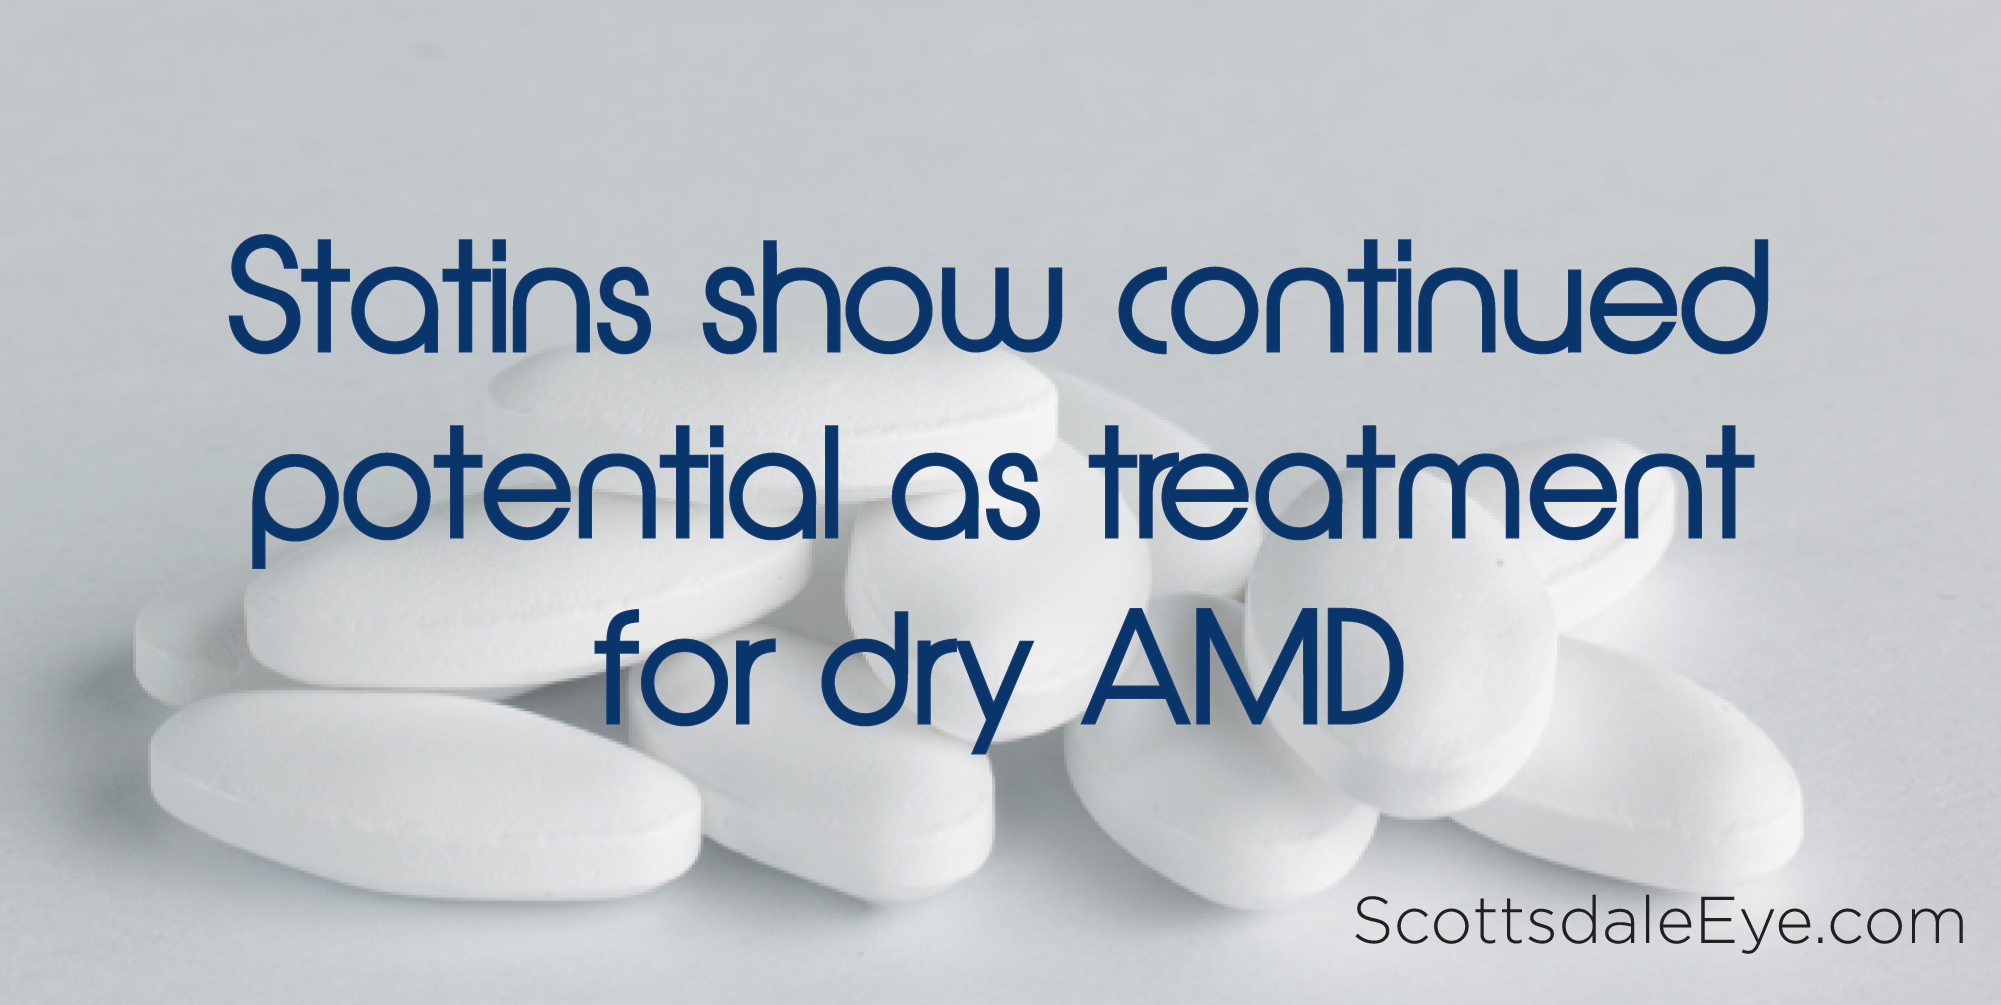 Statins show continued potential as treatment for dry AMD